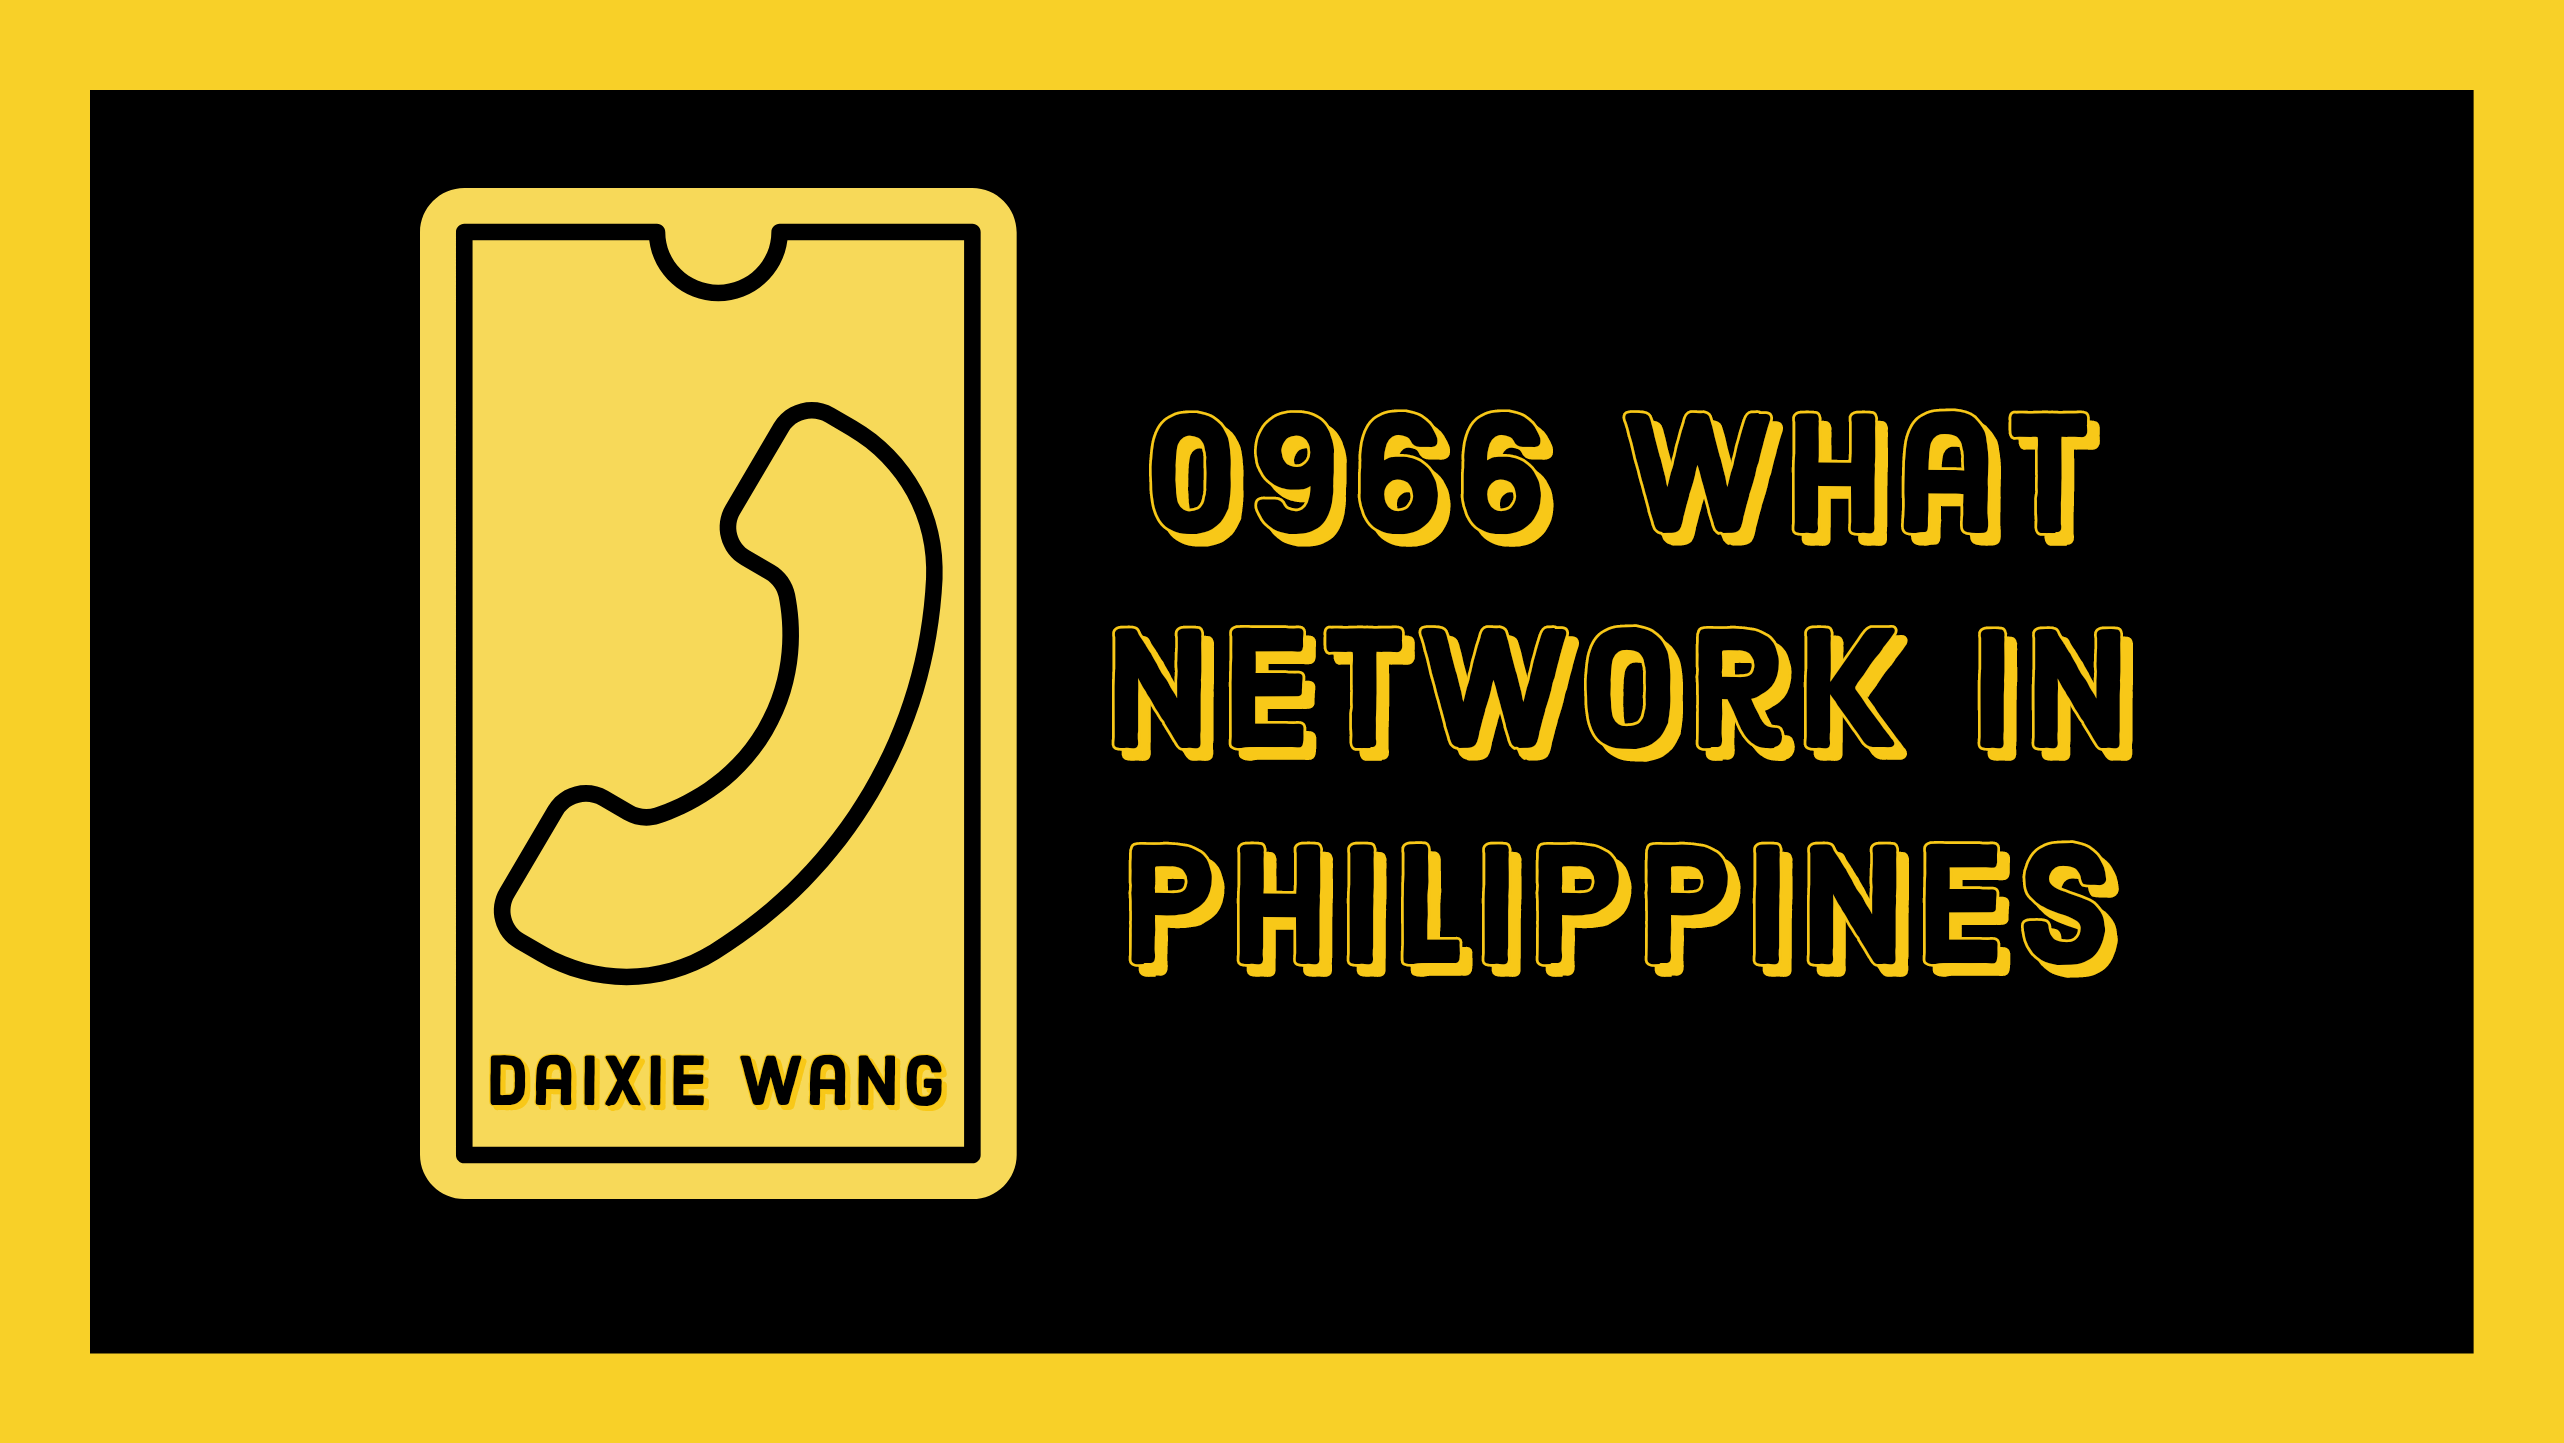 0966 What Network Philippines what network is 0966 in the Philippines